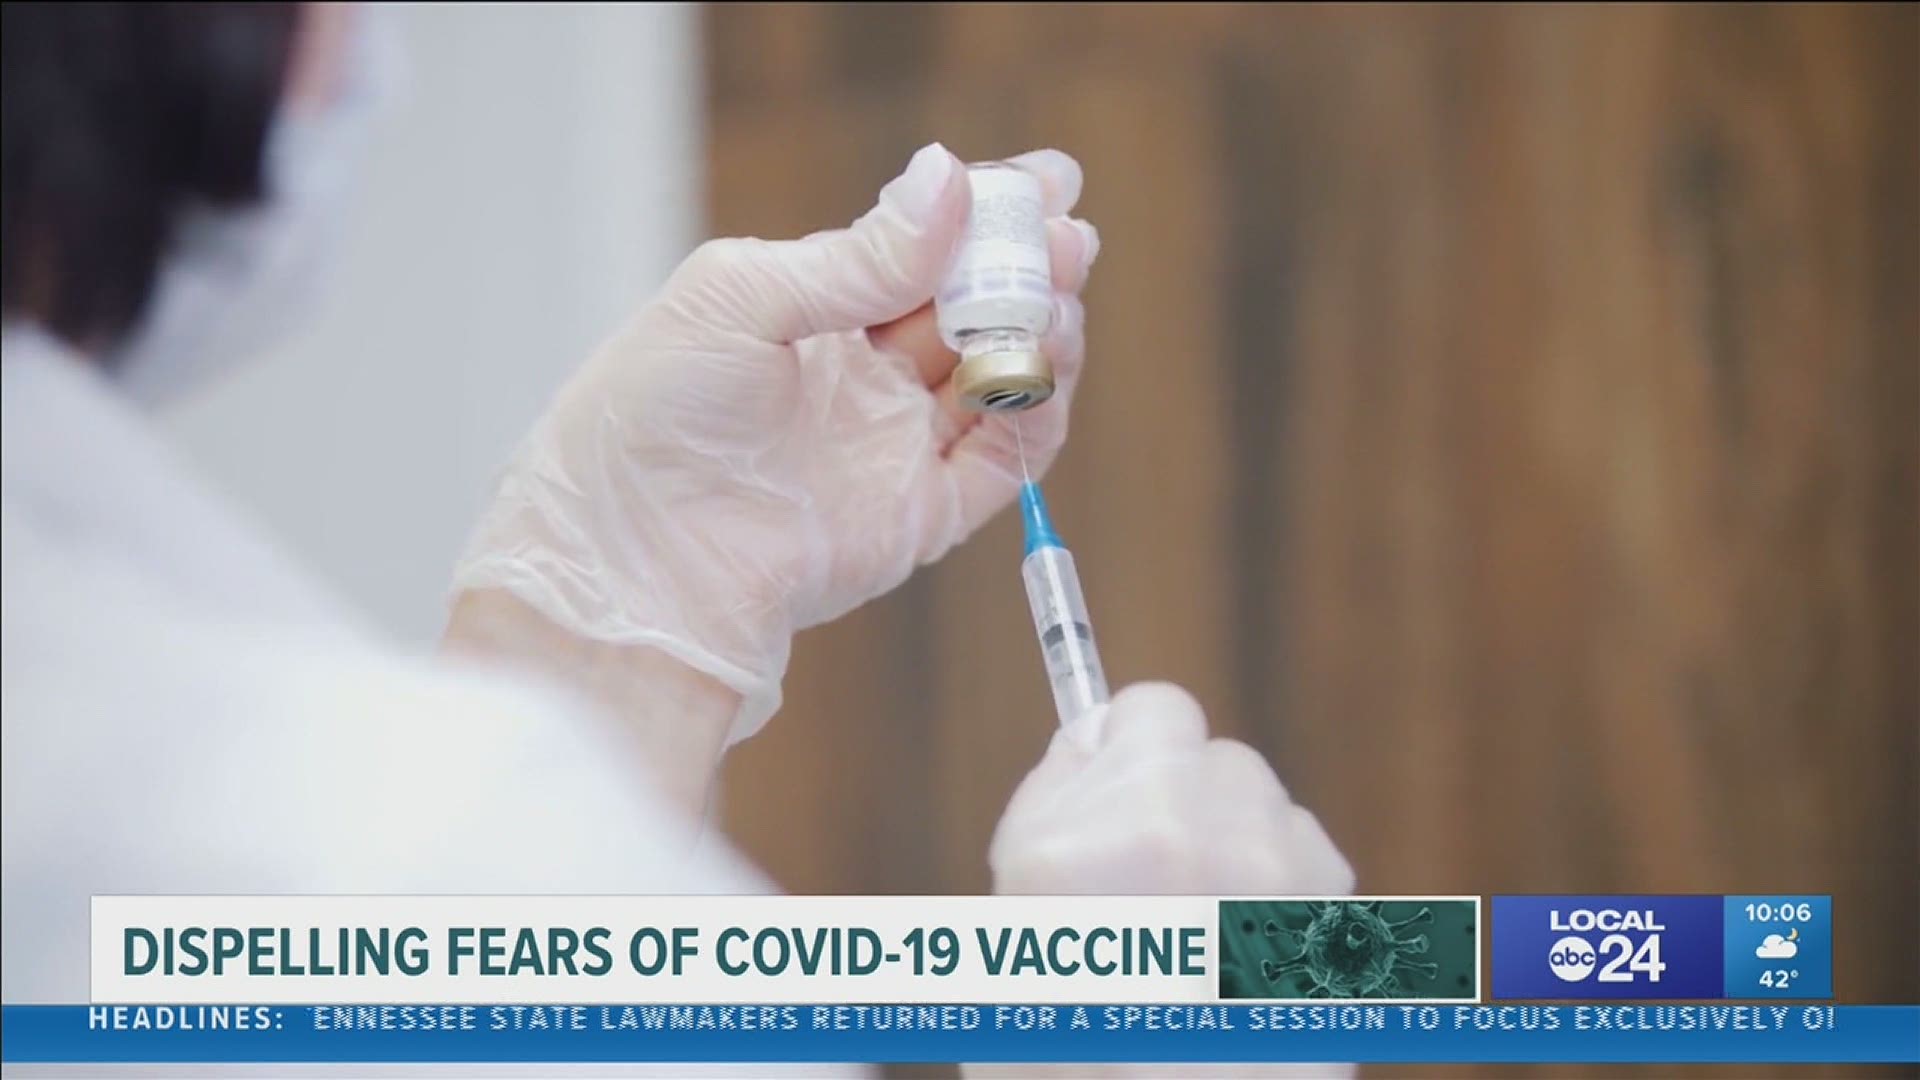 Pastor Kia Moore will welcome Dr. Kizzmekia Corbett this month to help clear up misconceptions about the COVID-19 vaccine.